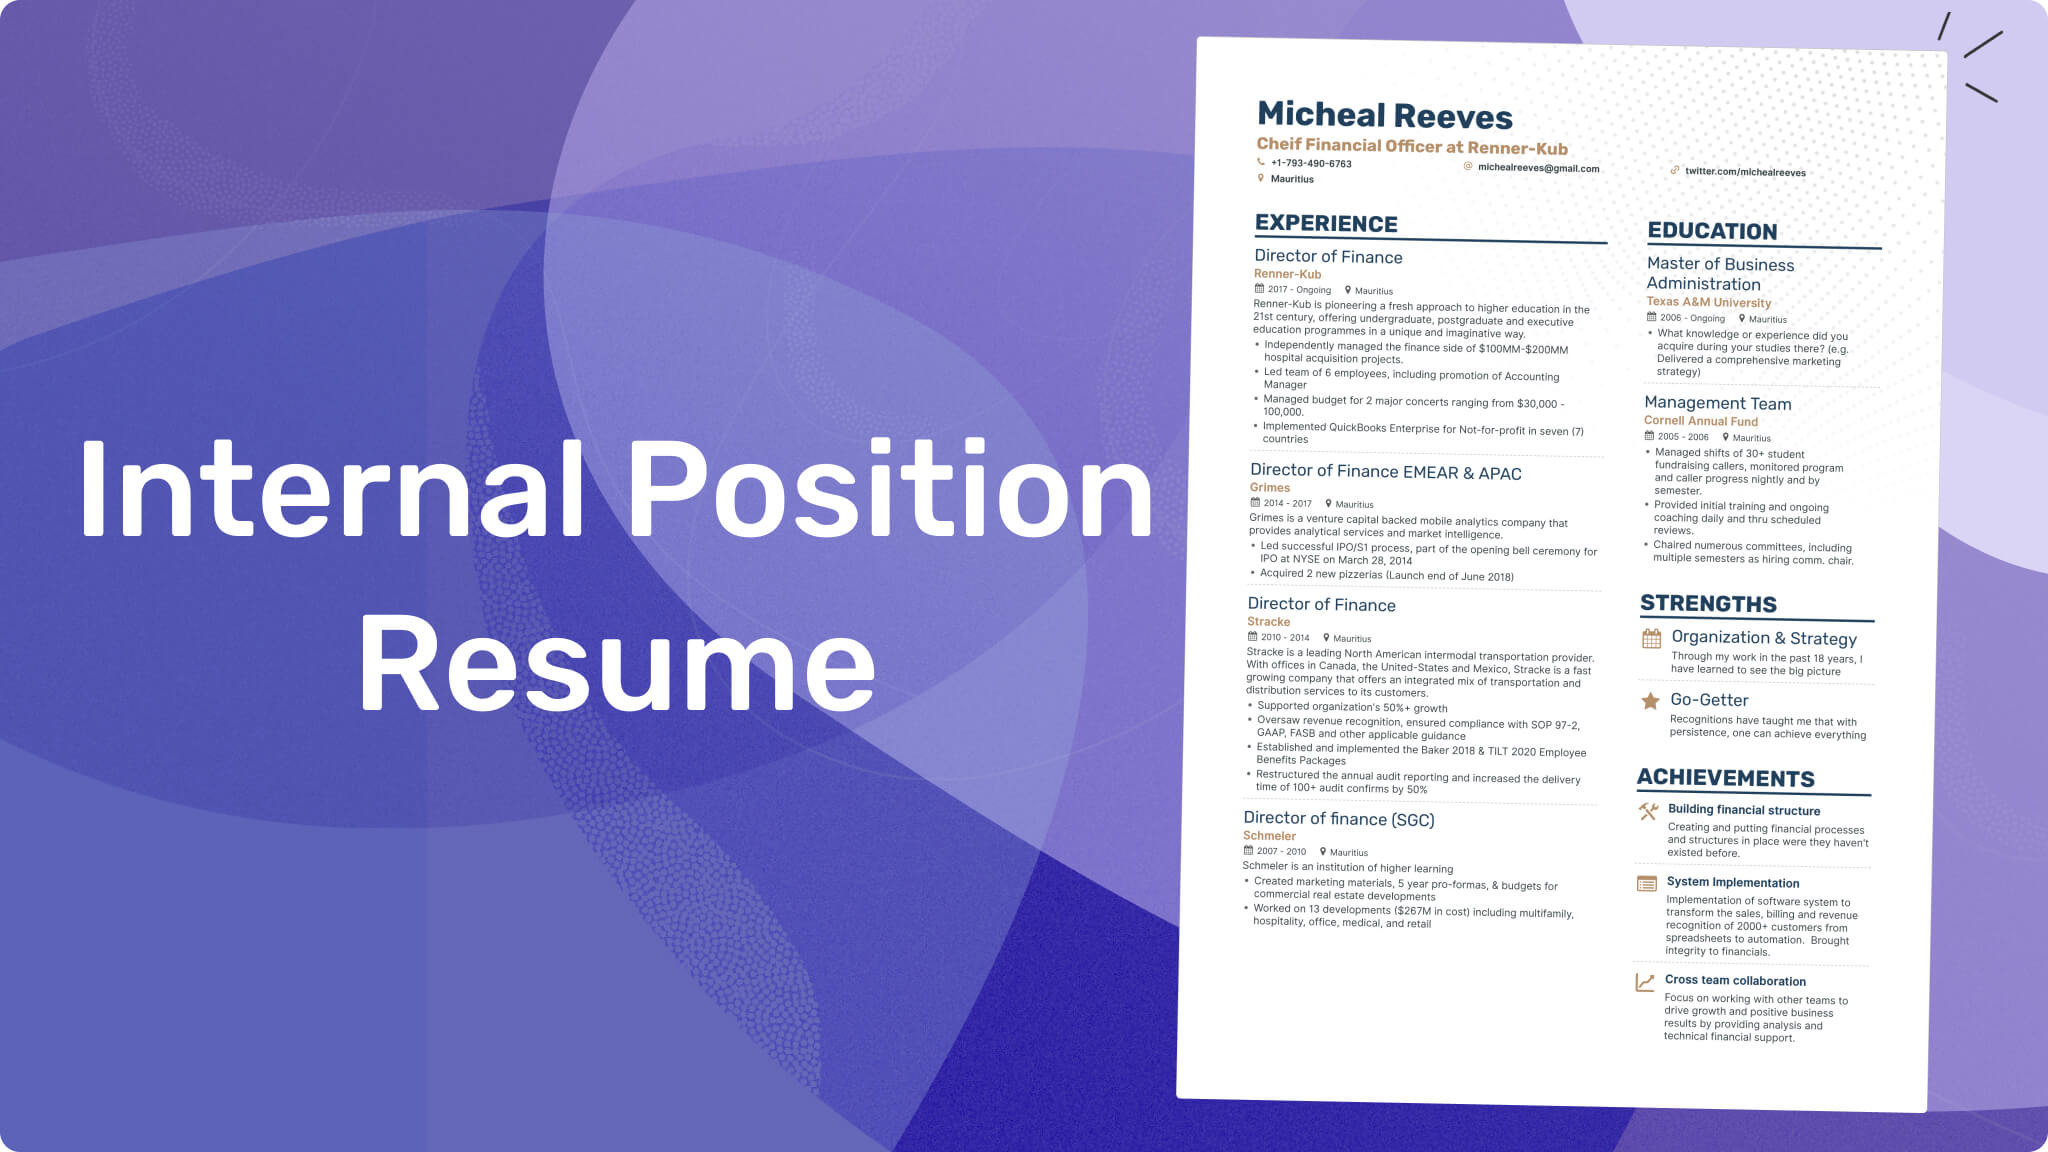 Resume for Moving Up In the Same Company Sample Resume for Internal Position â How to Make One